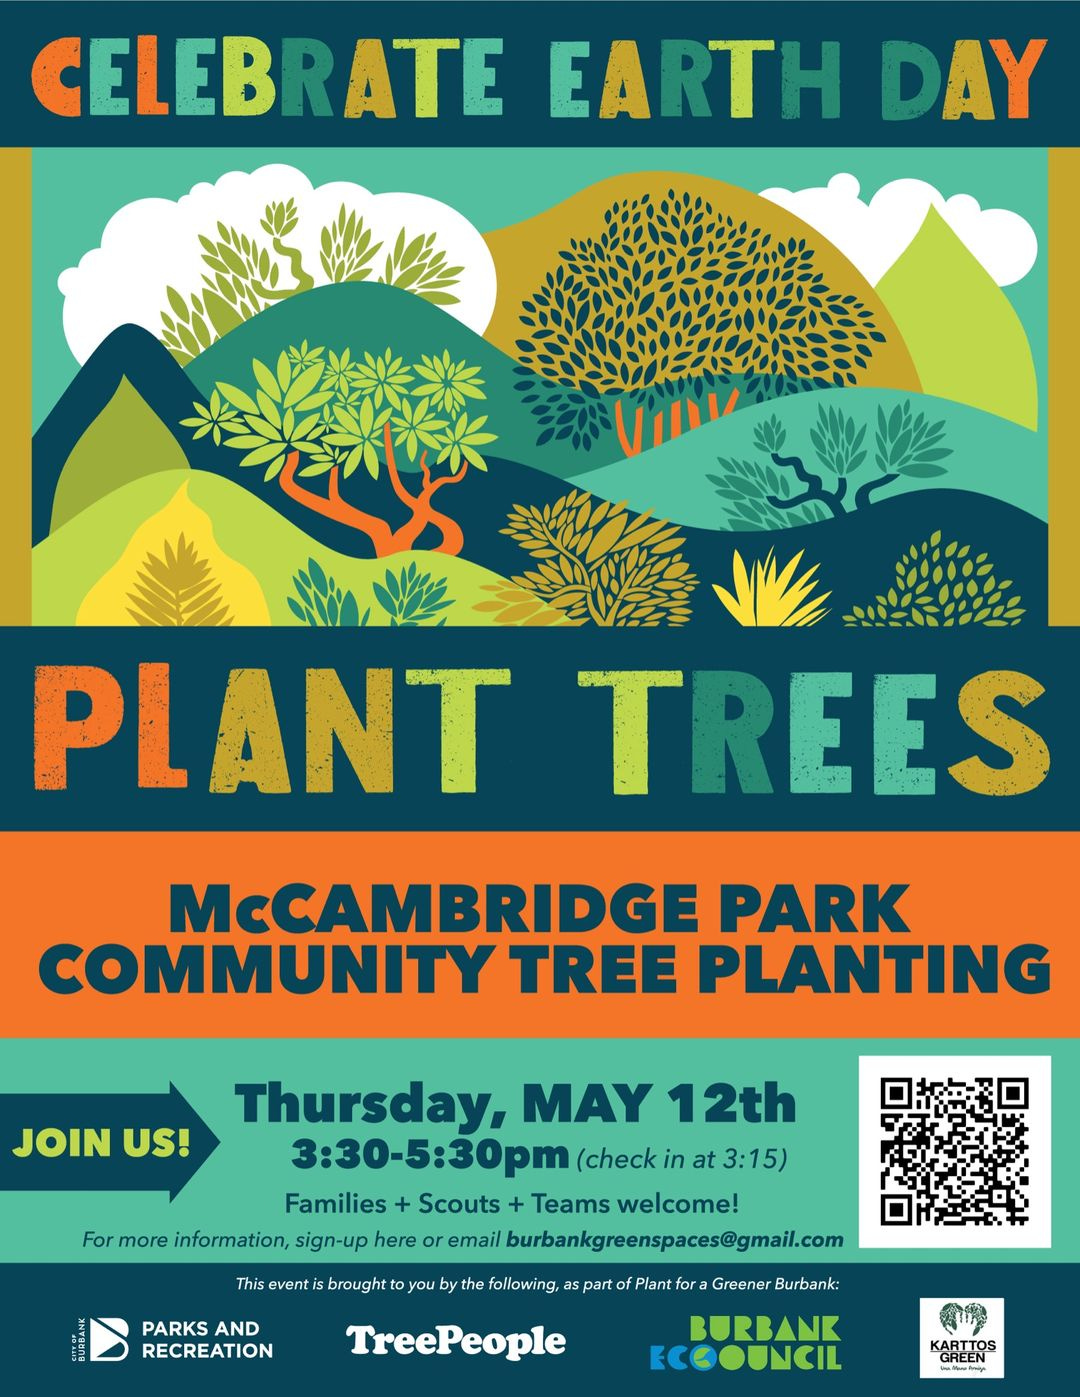 May be an image of text that says 'CELEBRATE EARTH DAY PLANT TREES McCAMBRIDGE PARK COMMUNITY TREE PLANTING JOIN US! Thursday, MAY 12th 3:30-5:30pm (check in at 3:15) Families+ Scouts Teams welcome! For more information, sign-up here or email burbankgreenspaces@gmail.com This event broughtto you PARKS AND RECREATION the following as part Plant Greener Burbank: TreePeople BURBANK "COOUNCIL KARTTOS'